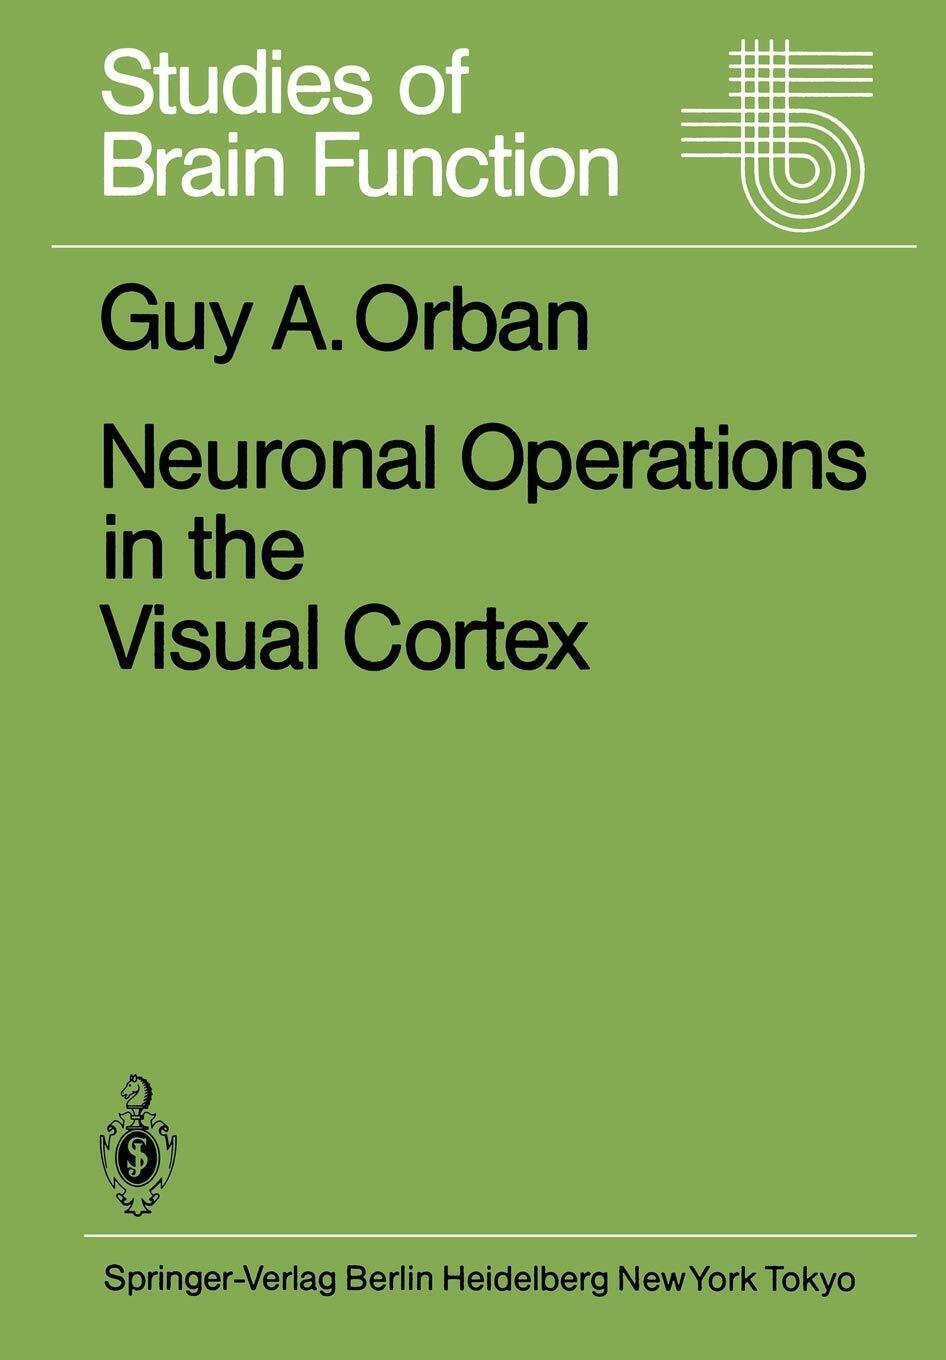 Neuronal Operations in the Visual Cortex - G. A. Orban - Springer, 2012